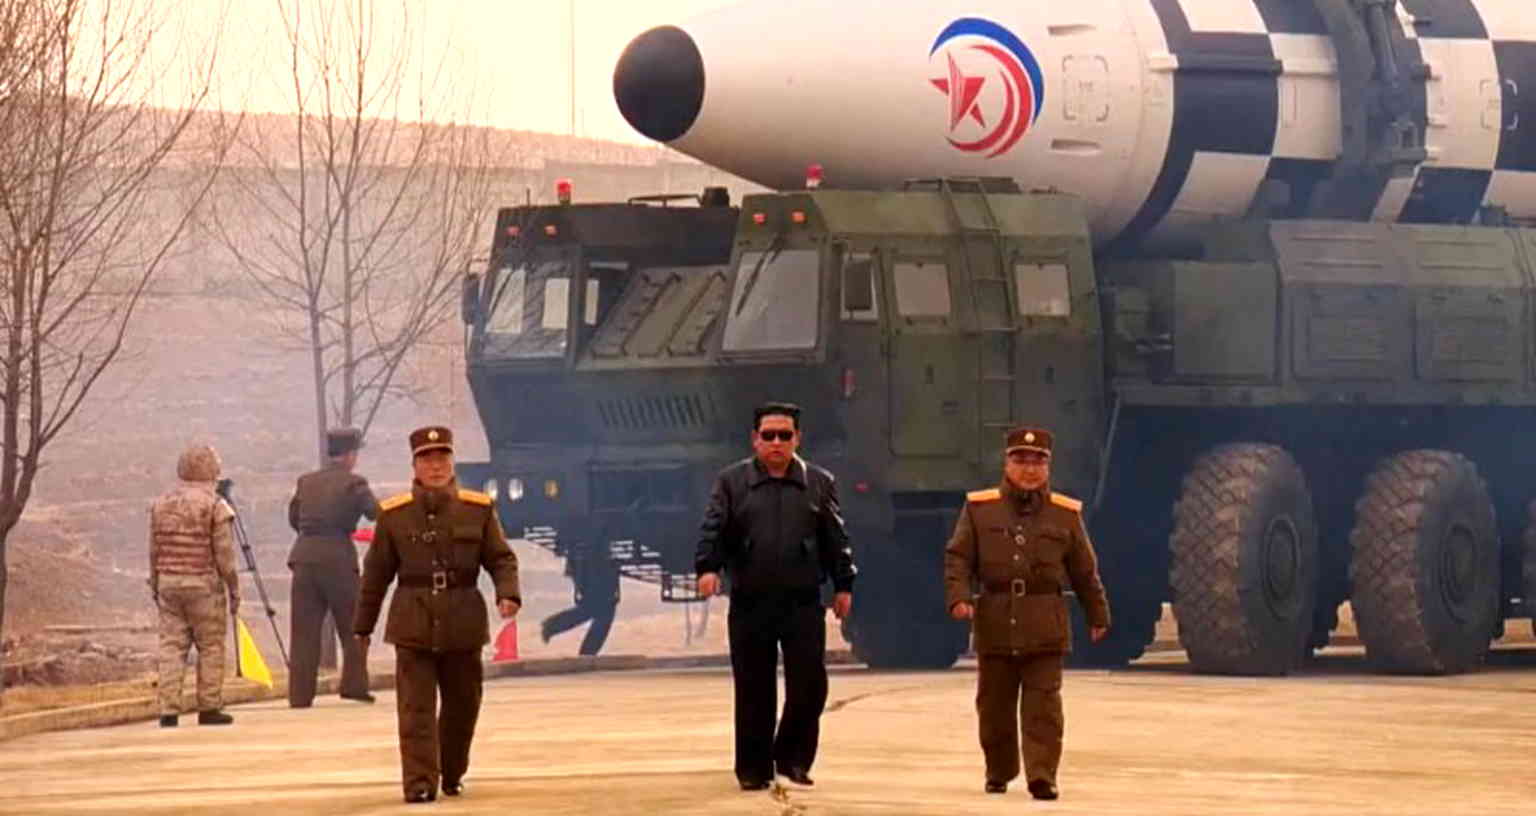 North Korea’s recent ICBM launch was faked, says South Korea